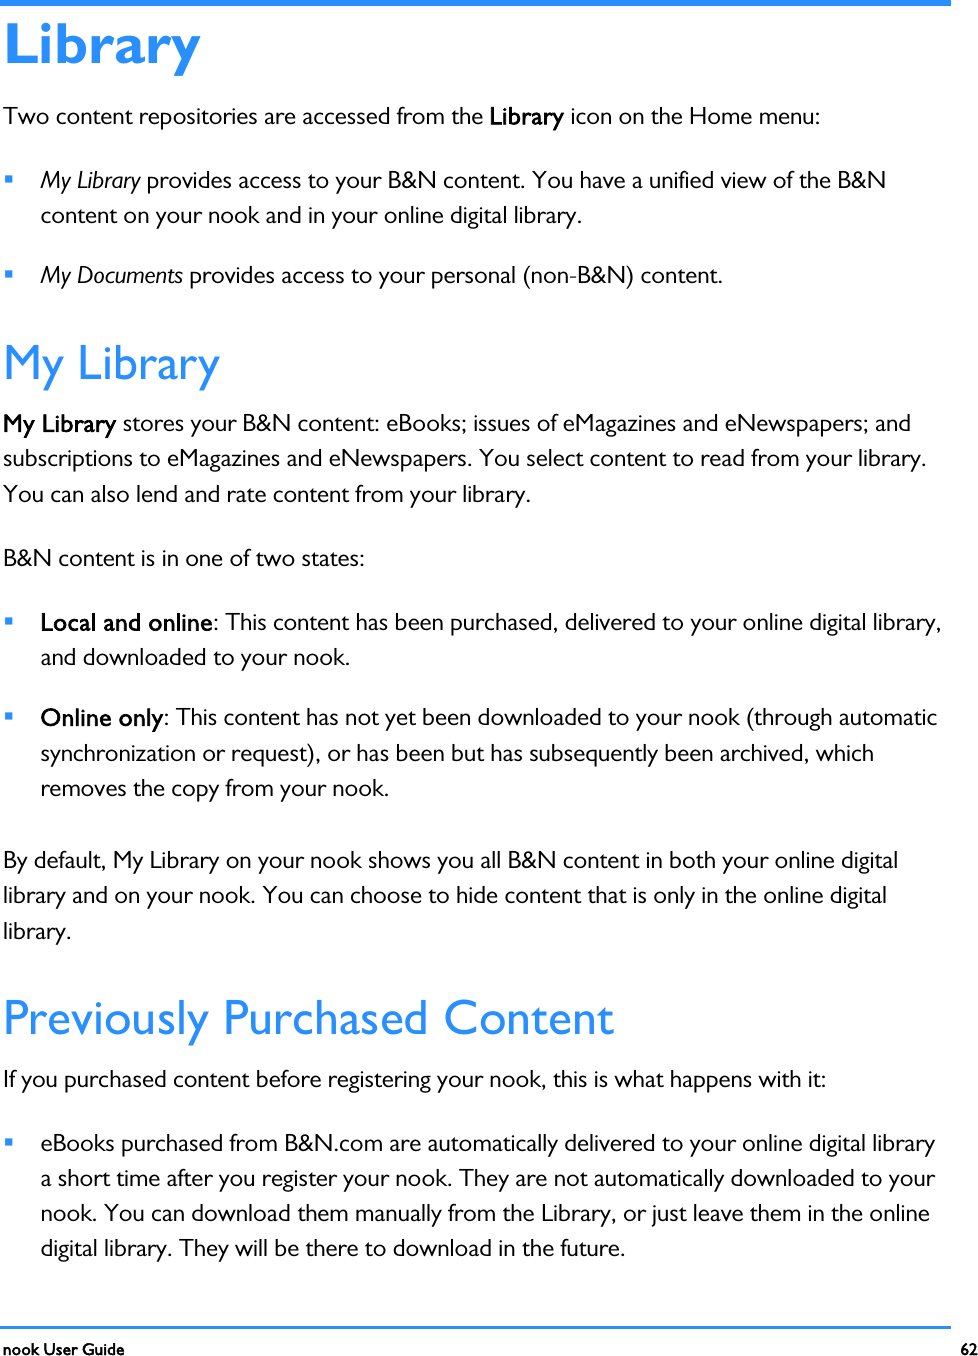  nook User Guide    62        Library Two content repositories are accessed from the Library icon on the Home menu:  My Library provides access to your B&amp;N content. You have a unified view of the B&amp;N content on your nook and in your online digital library.  My Documents provides access to your personal (non-B&amp;N) content. My Library My Library stores your B&amp;N content: eBooks; issues of eMagazines and eNewspapers; and subscriptions to eMagazines and eNewspapers. You select content to read from your library. You can also lend and rate content from your library. B&amp;N content is in one of two states:  Local and online: This content has been purchased, delivered to your online digital library, and downloaded to your nook.  Online only: This content has not yet been downloaded to your nook (through automatic synchronization or request), or has been but has subsequently been archived, which removes the copy from your nook. By default, My Library on your nook shows you all B&amp;N content in both your online digital library and on your nook. You can choose to hide content that is only in the online digital library. Previously Purchased Content If you purchased content before registering your nook, this is what happens with it:  eBooks purchased from B&amp;N.com are automatically delivered to your online digital library a short time after you register your nook. They are not automatically downloaded to your nook. You can download them manually from the Library, or just leave them in the online digital library. They will be there to download in the future. 